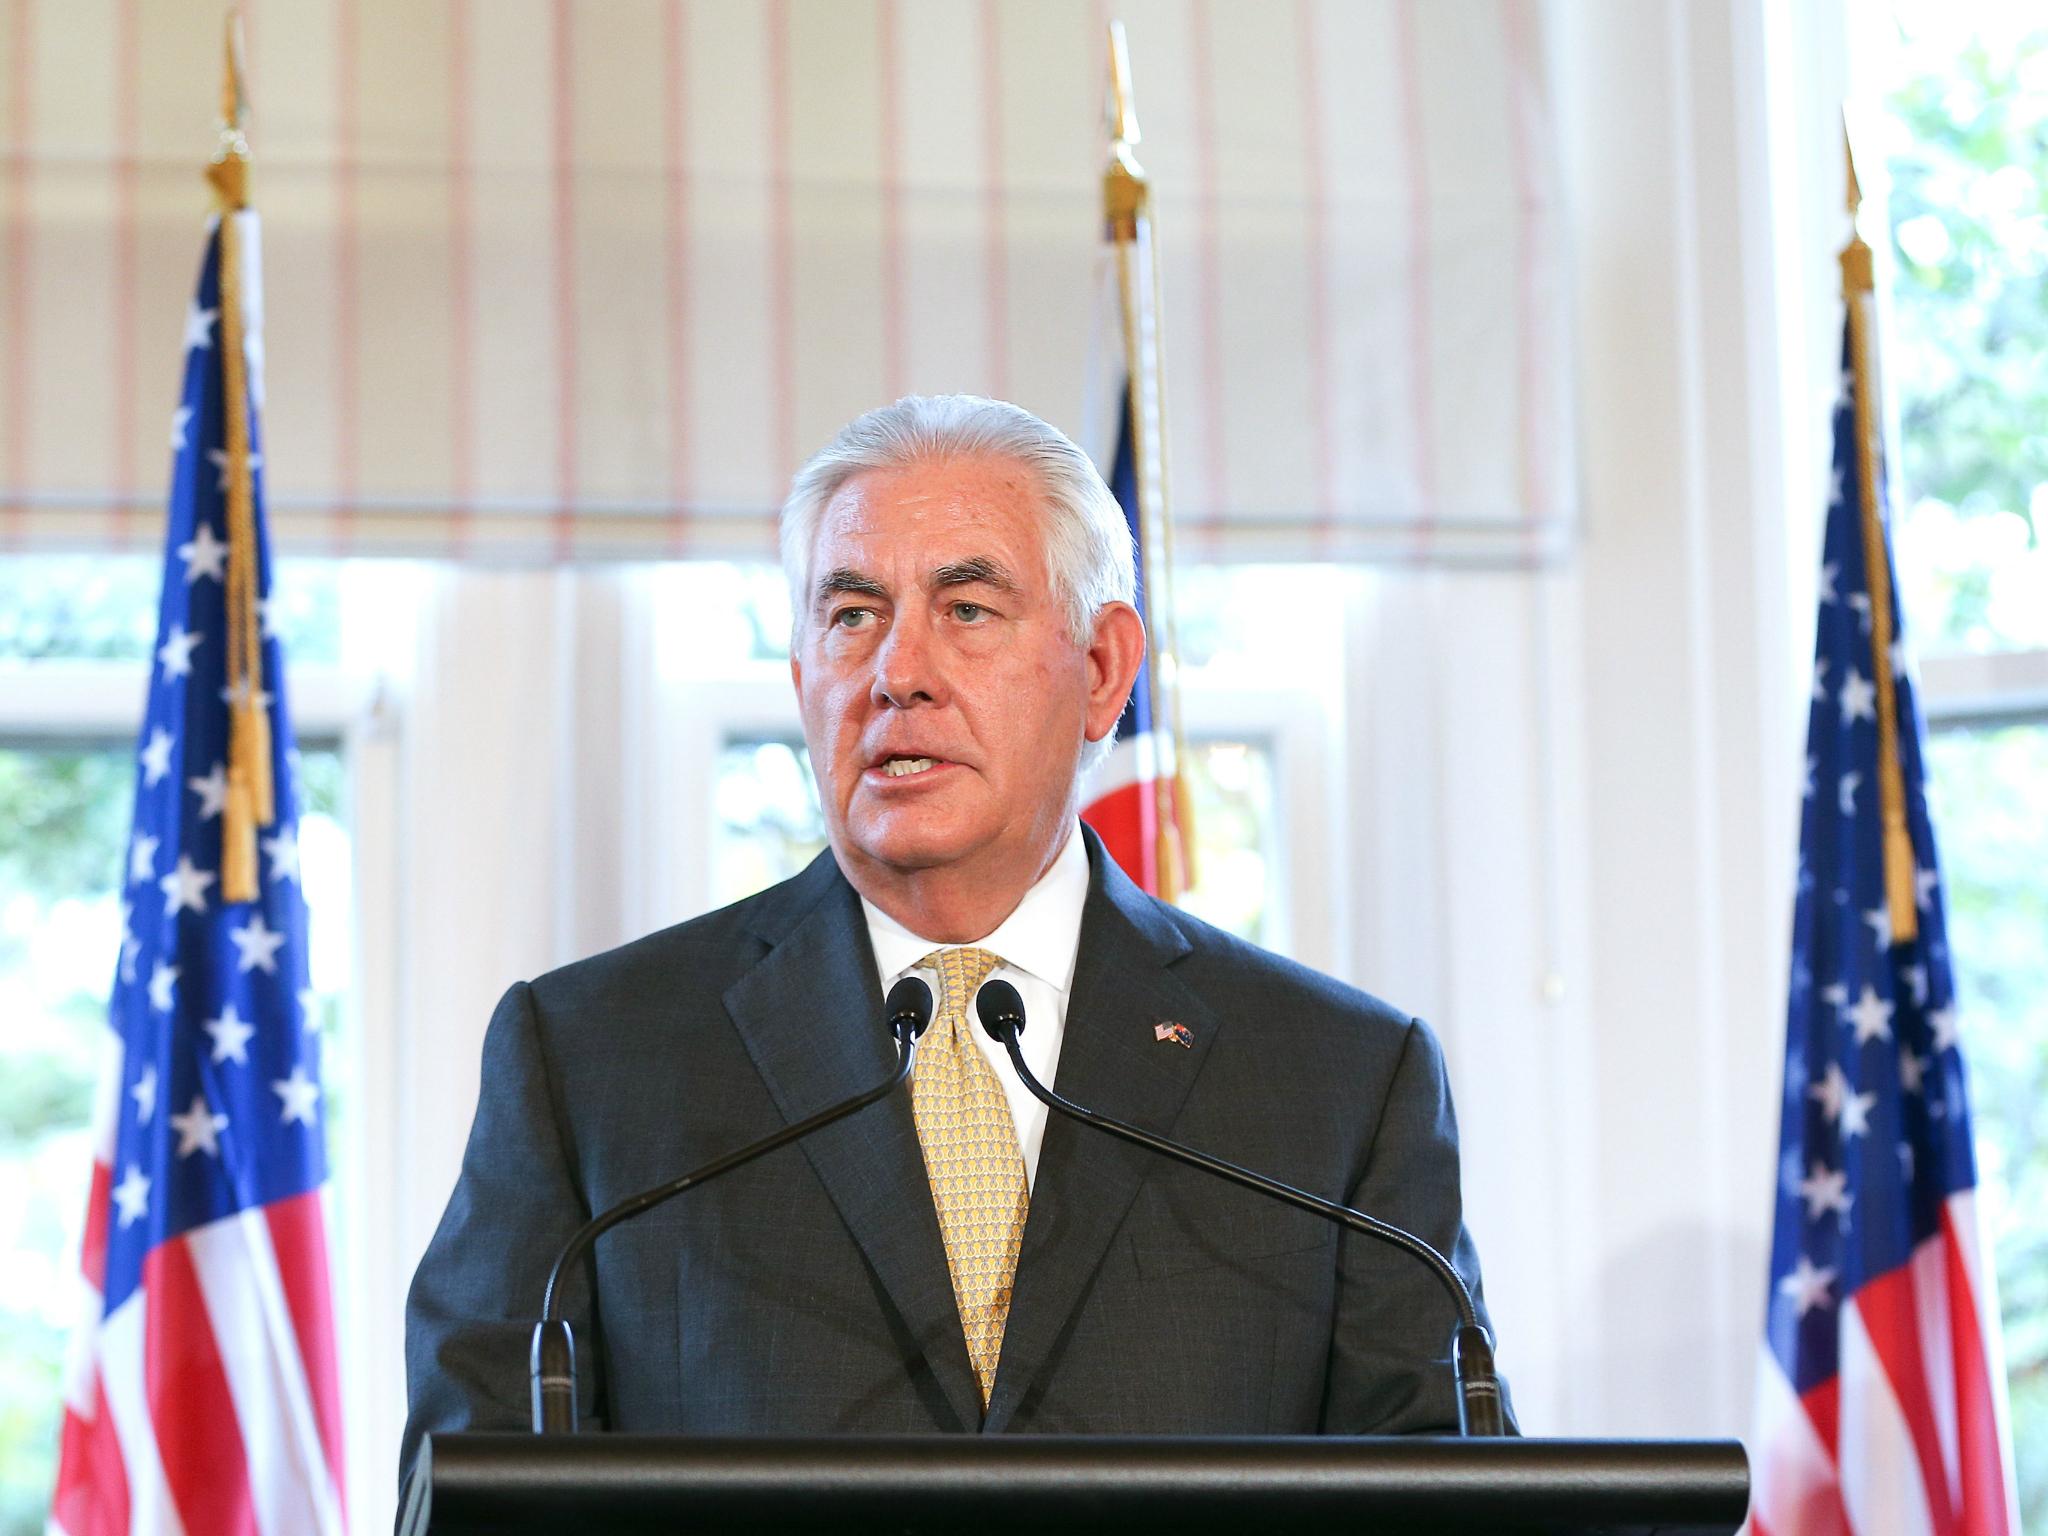 Secretary of State Rex Tillerson is set to receive an award from the World Petroleum Congress during his state visit to Turkey